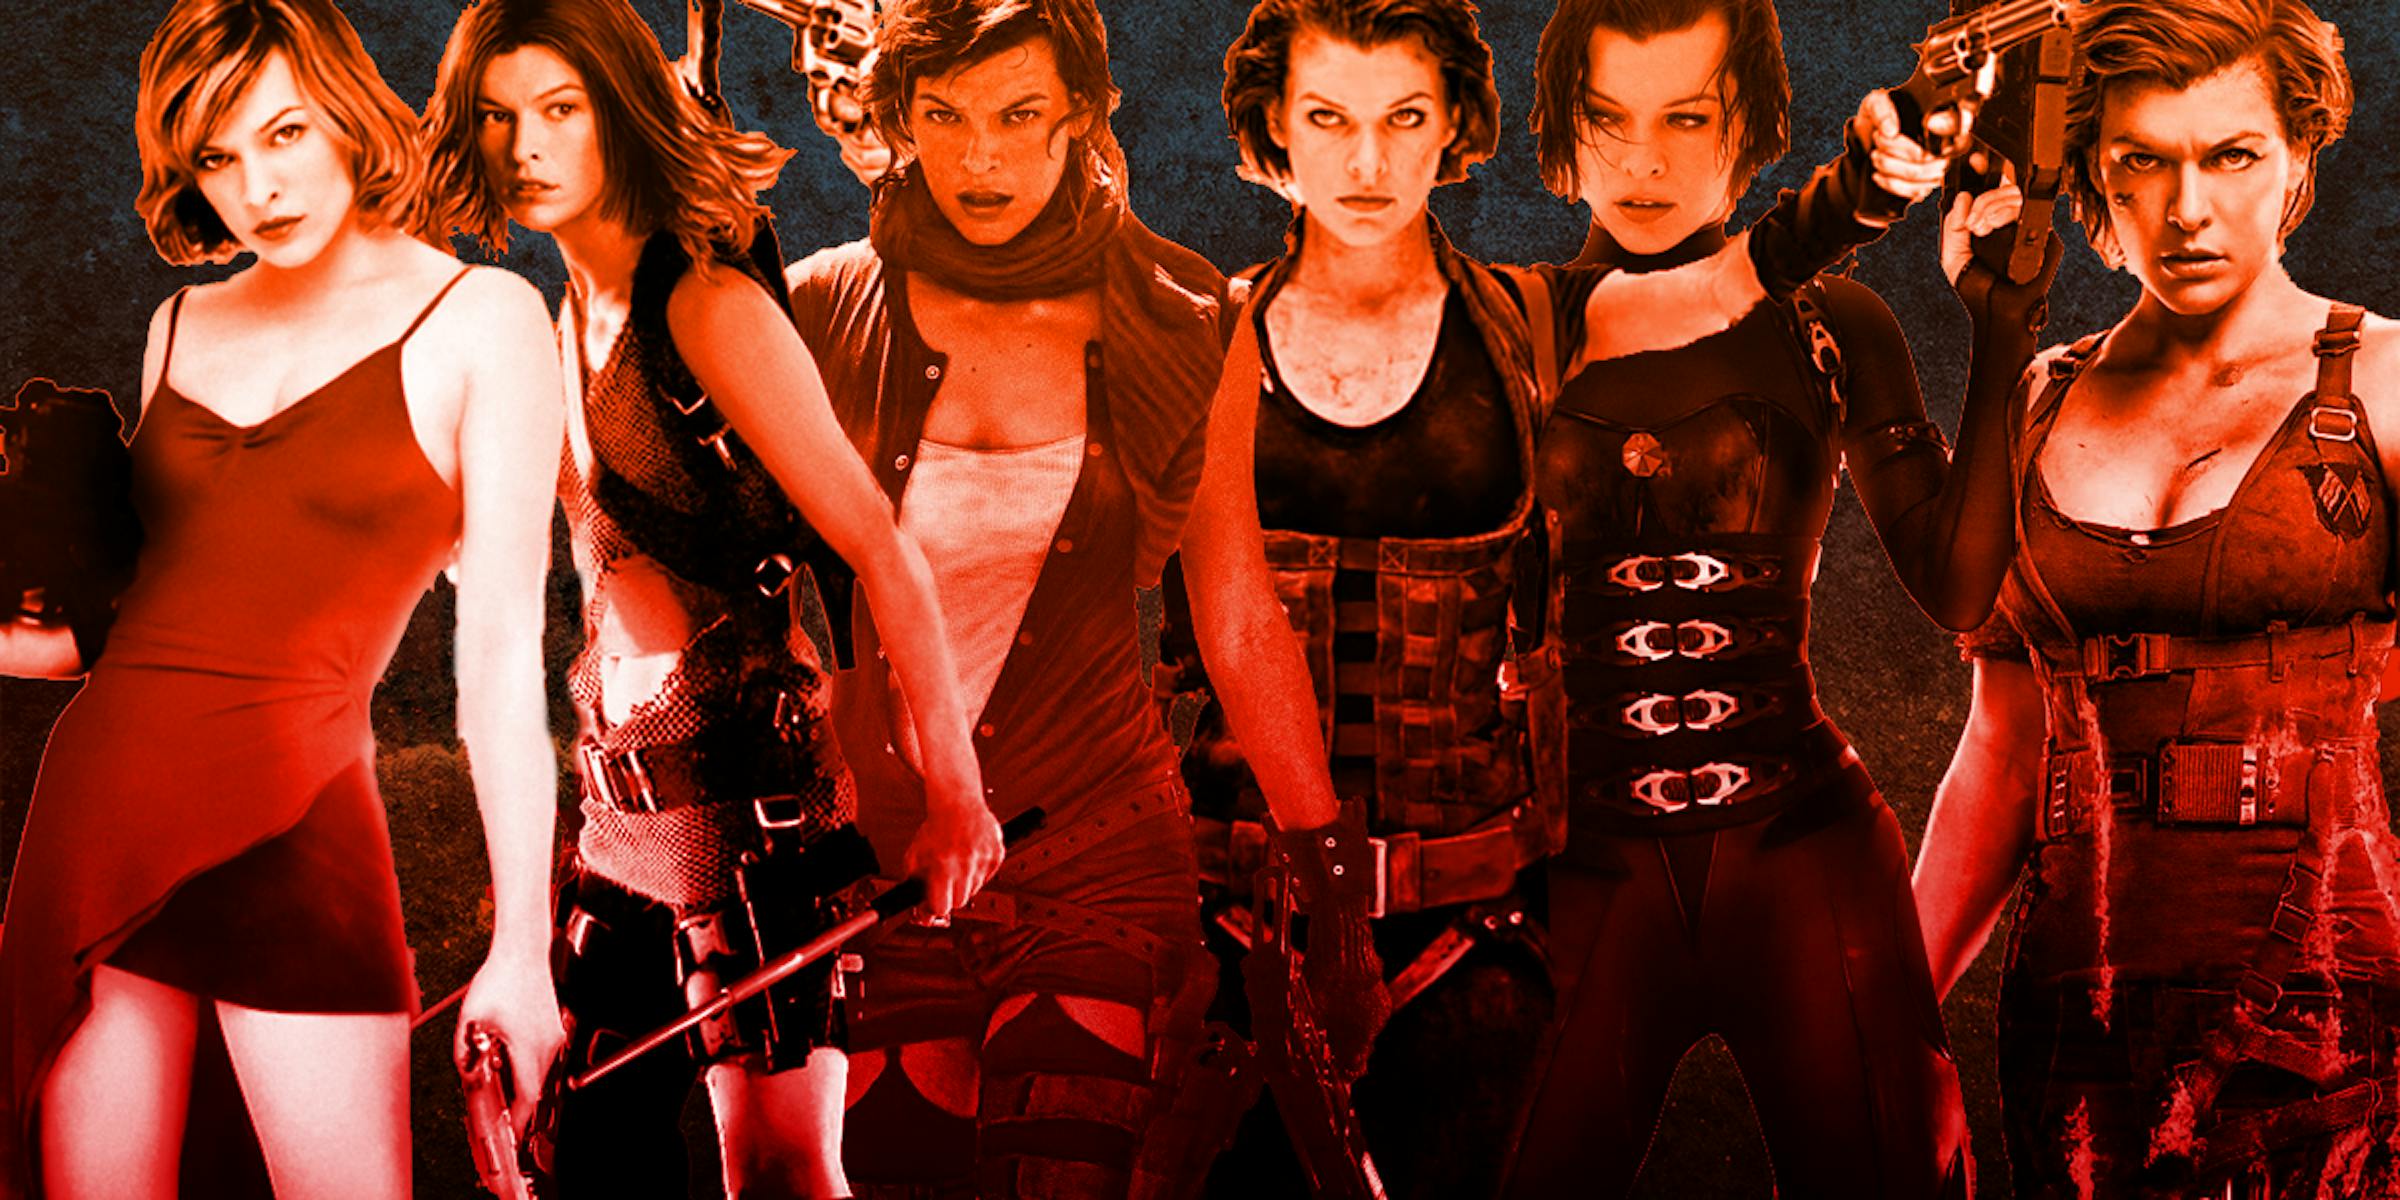 All the resident evil movies